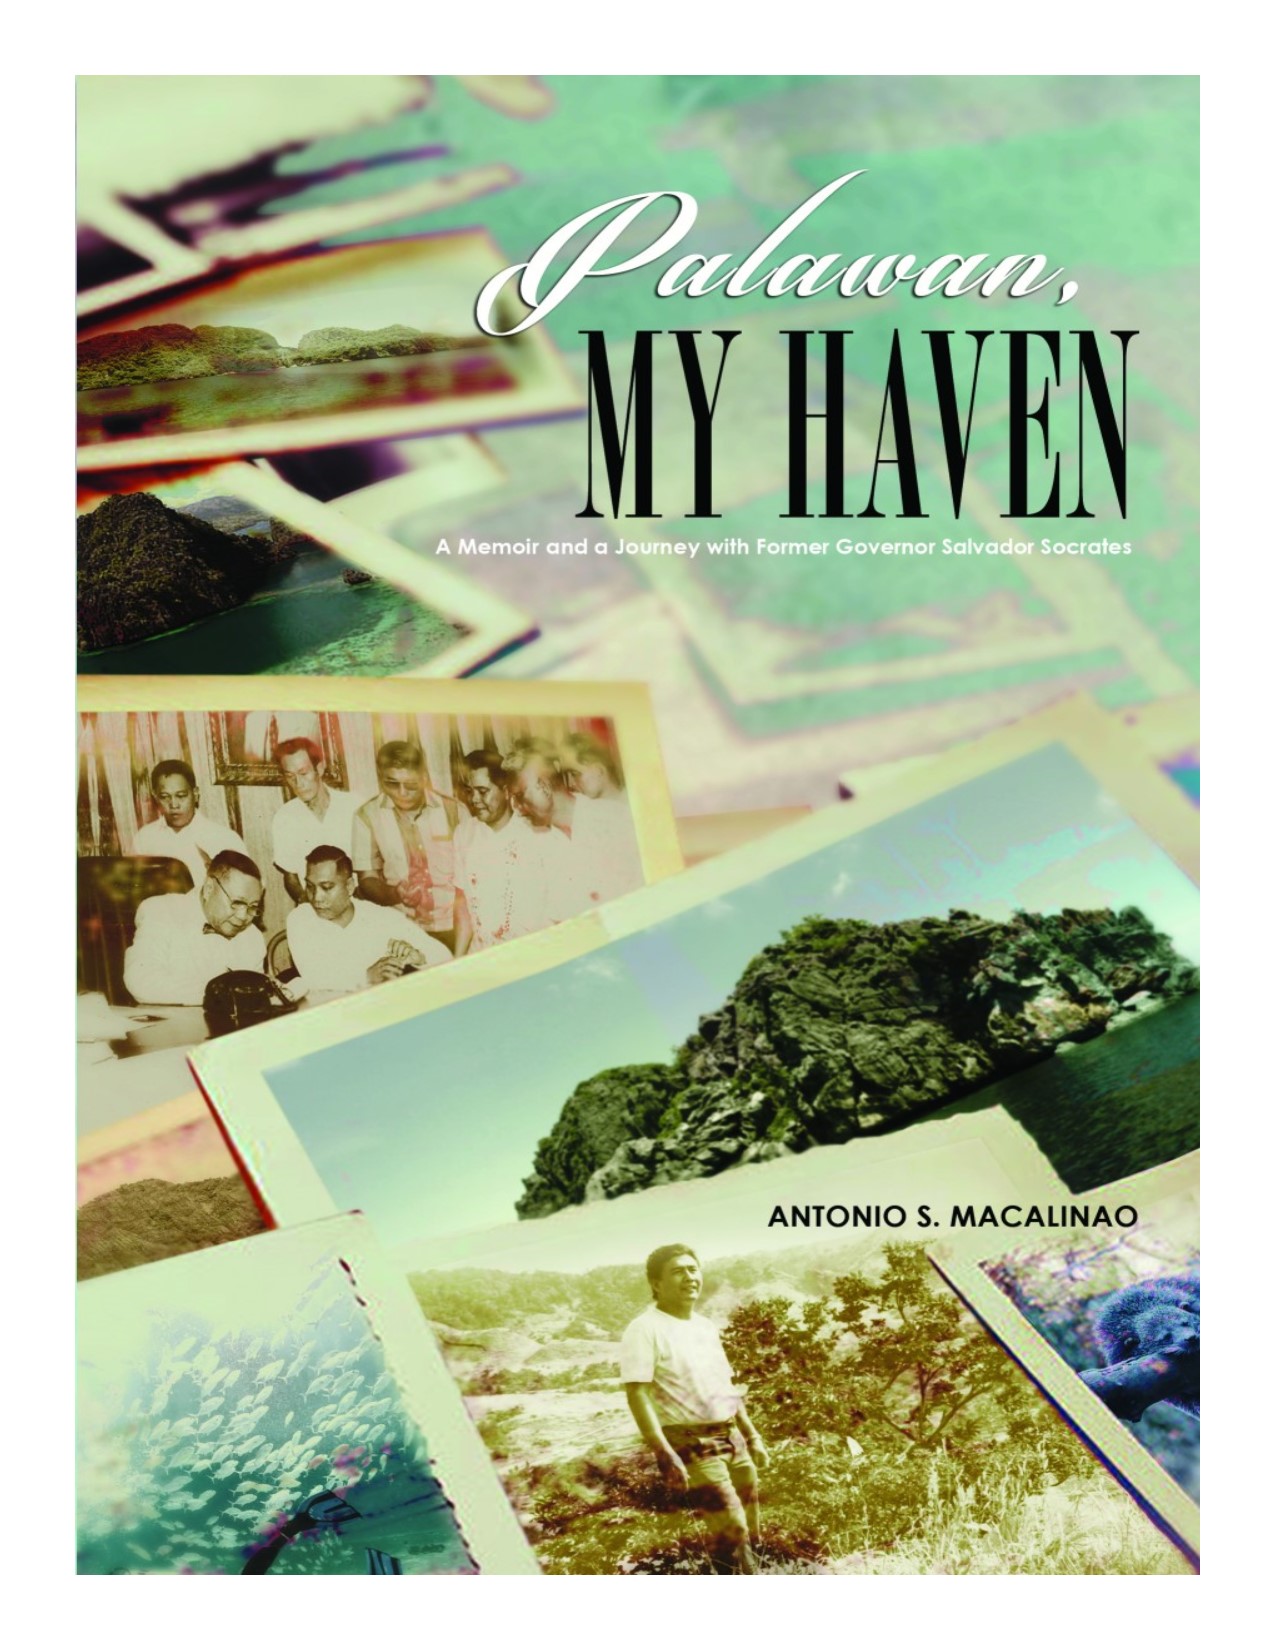 Palawan, my haven a memoir and a journey with former Governor Salvador Socrates